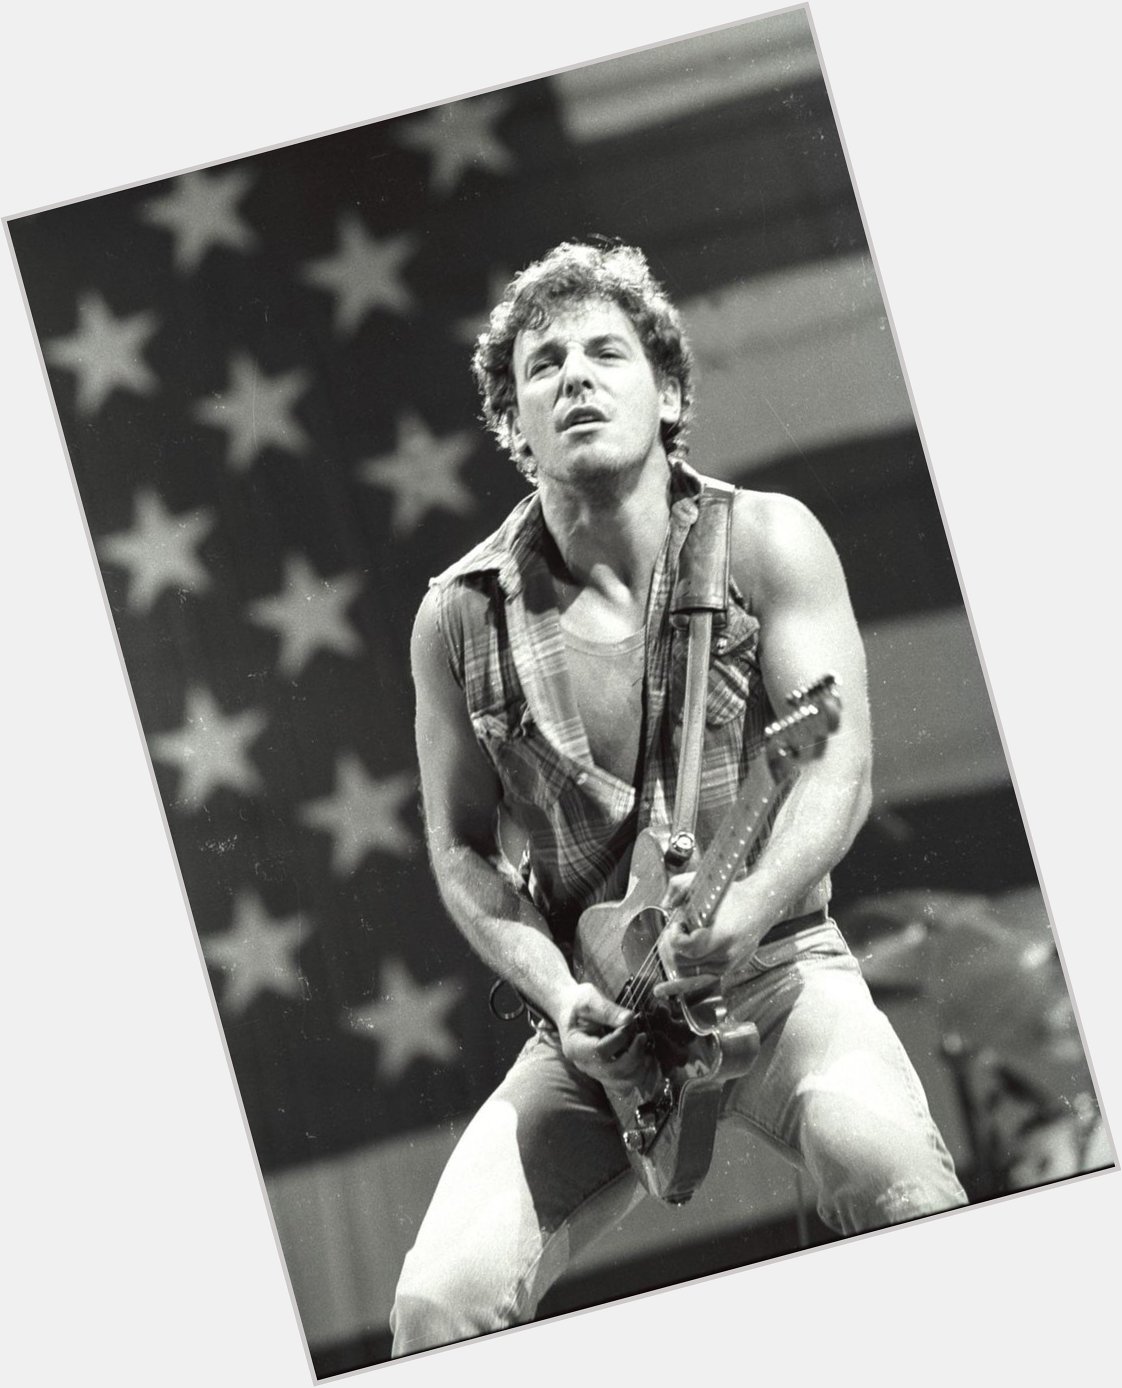 Happy 66th birthday to Bruce Springsteen! 